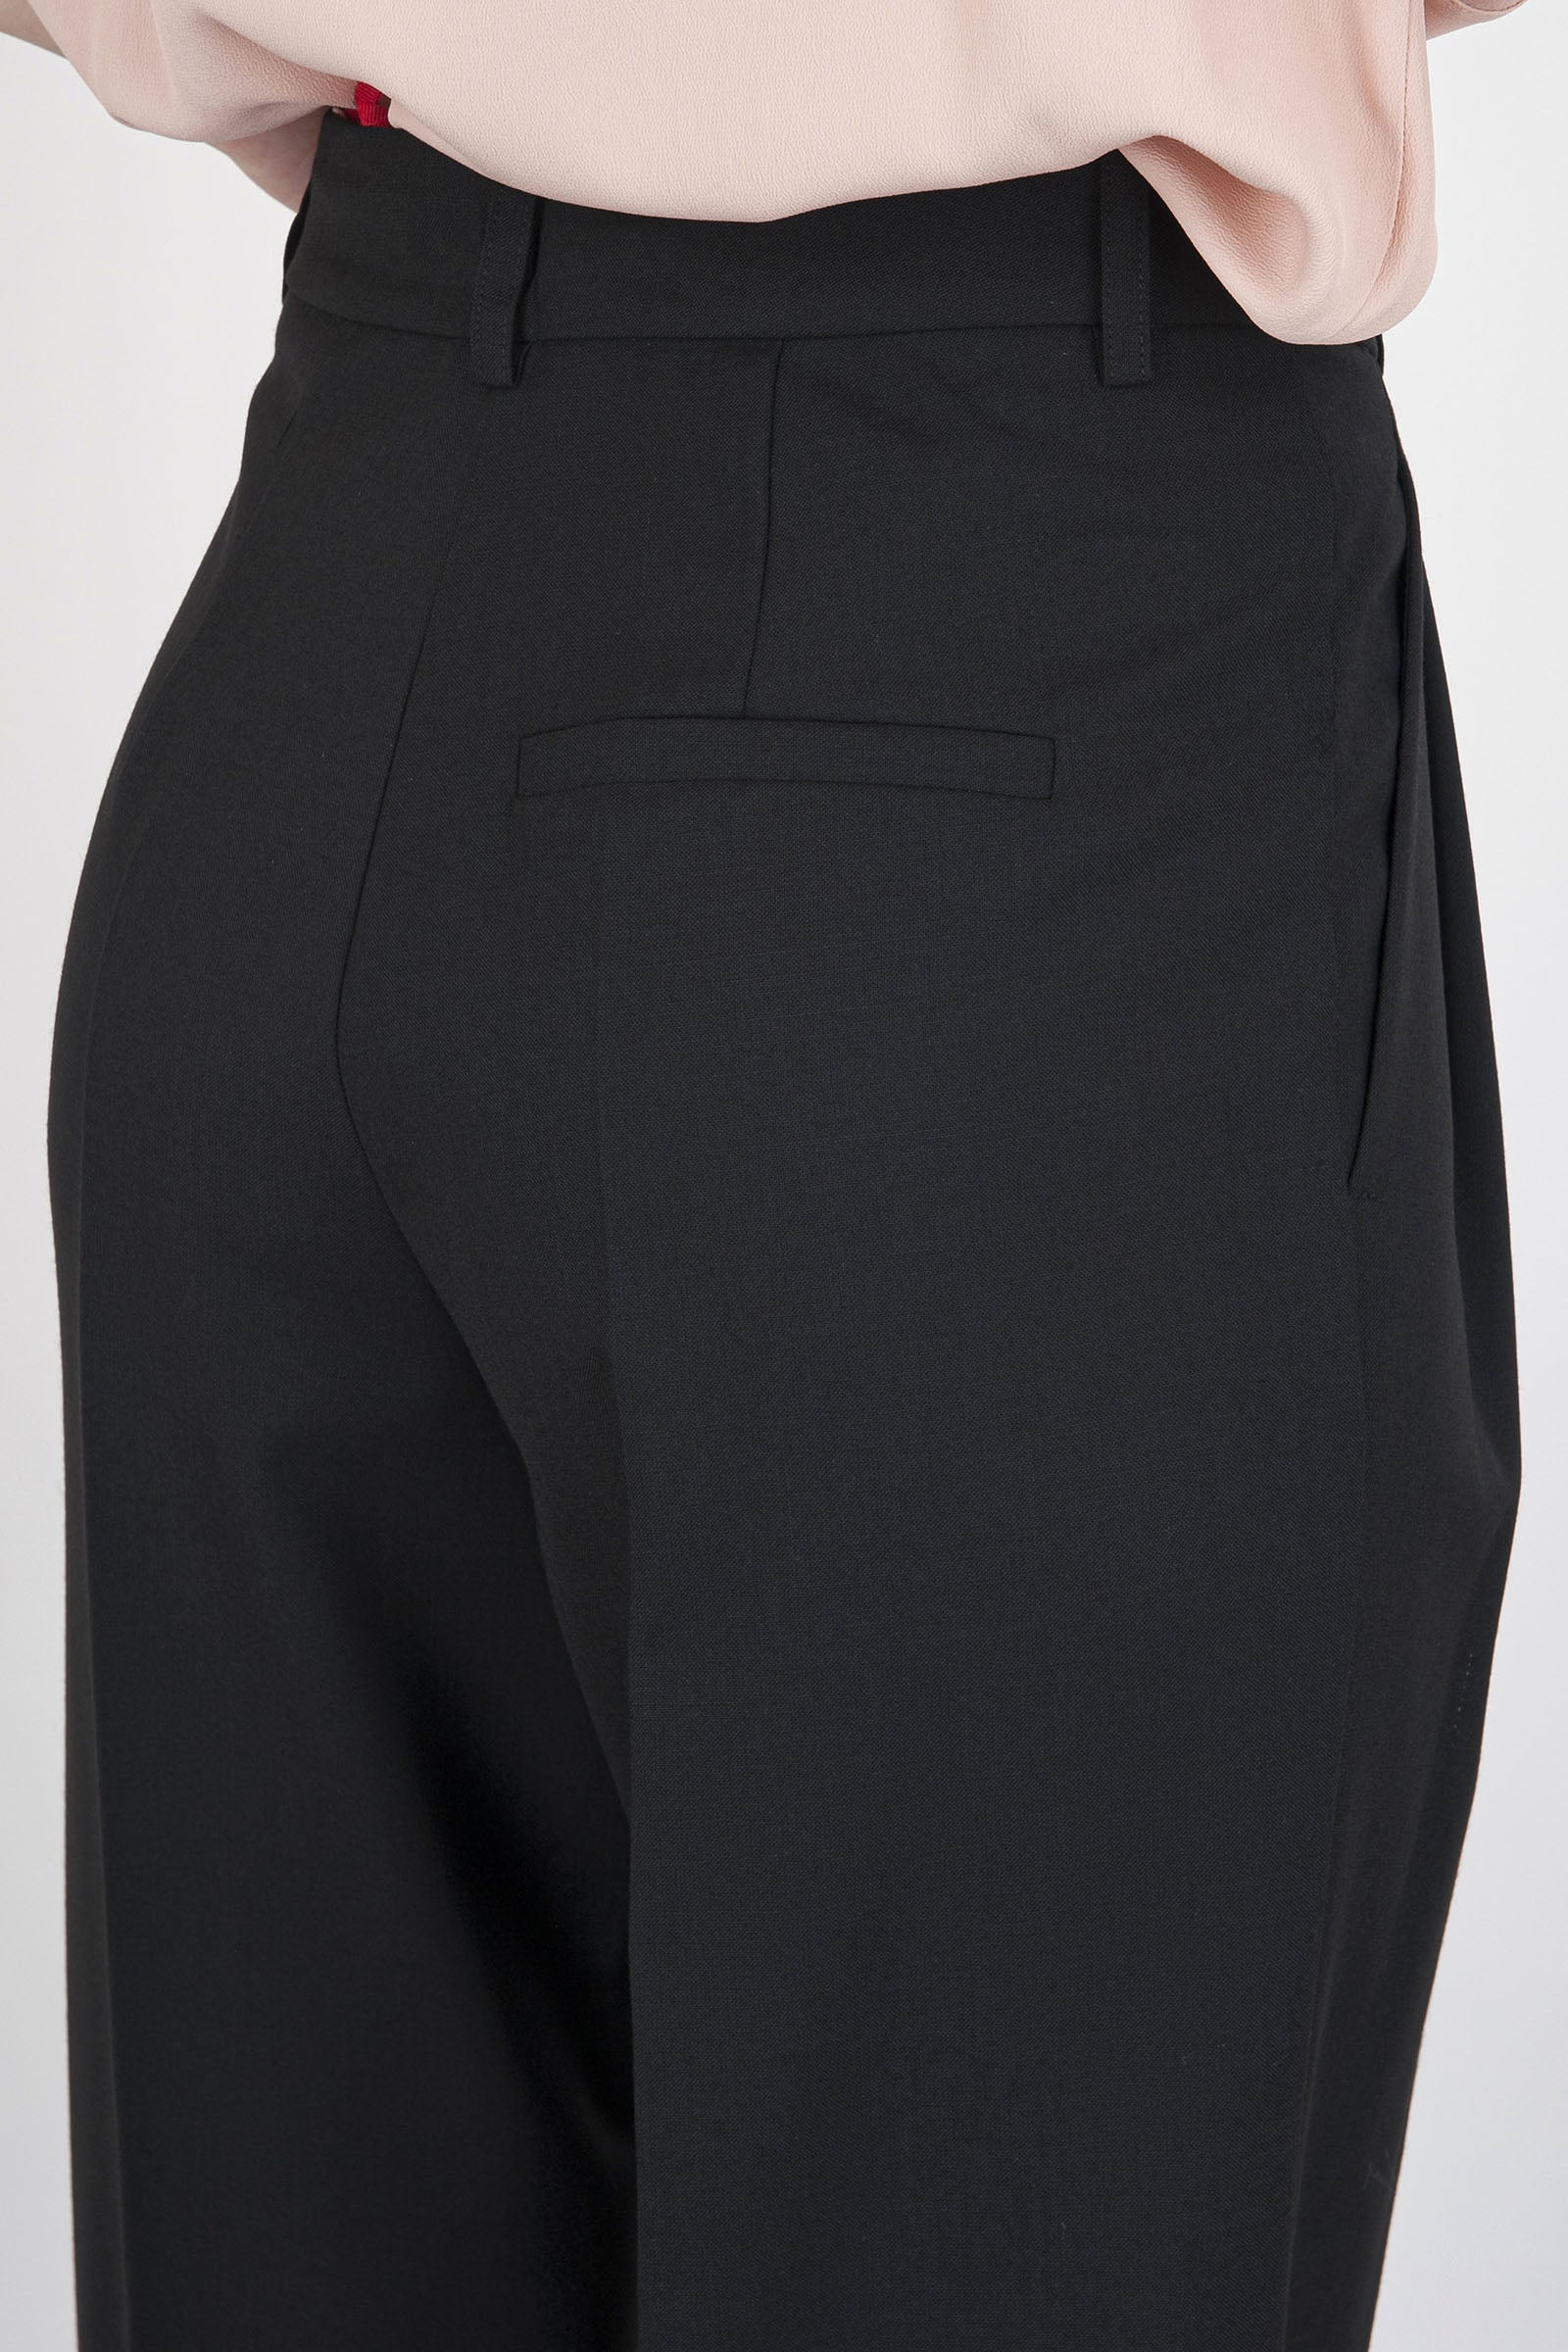 Semicouture Jody Synthetic Trousers Black - 6